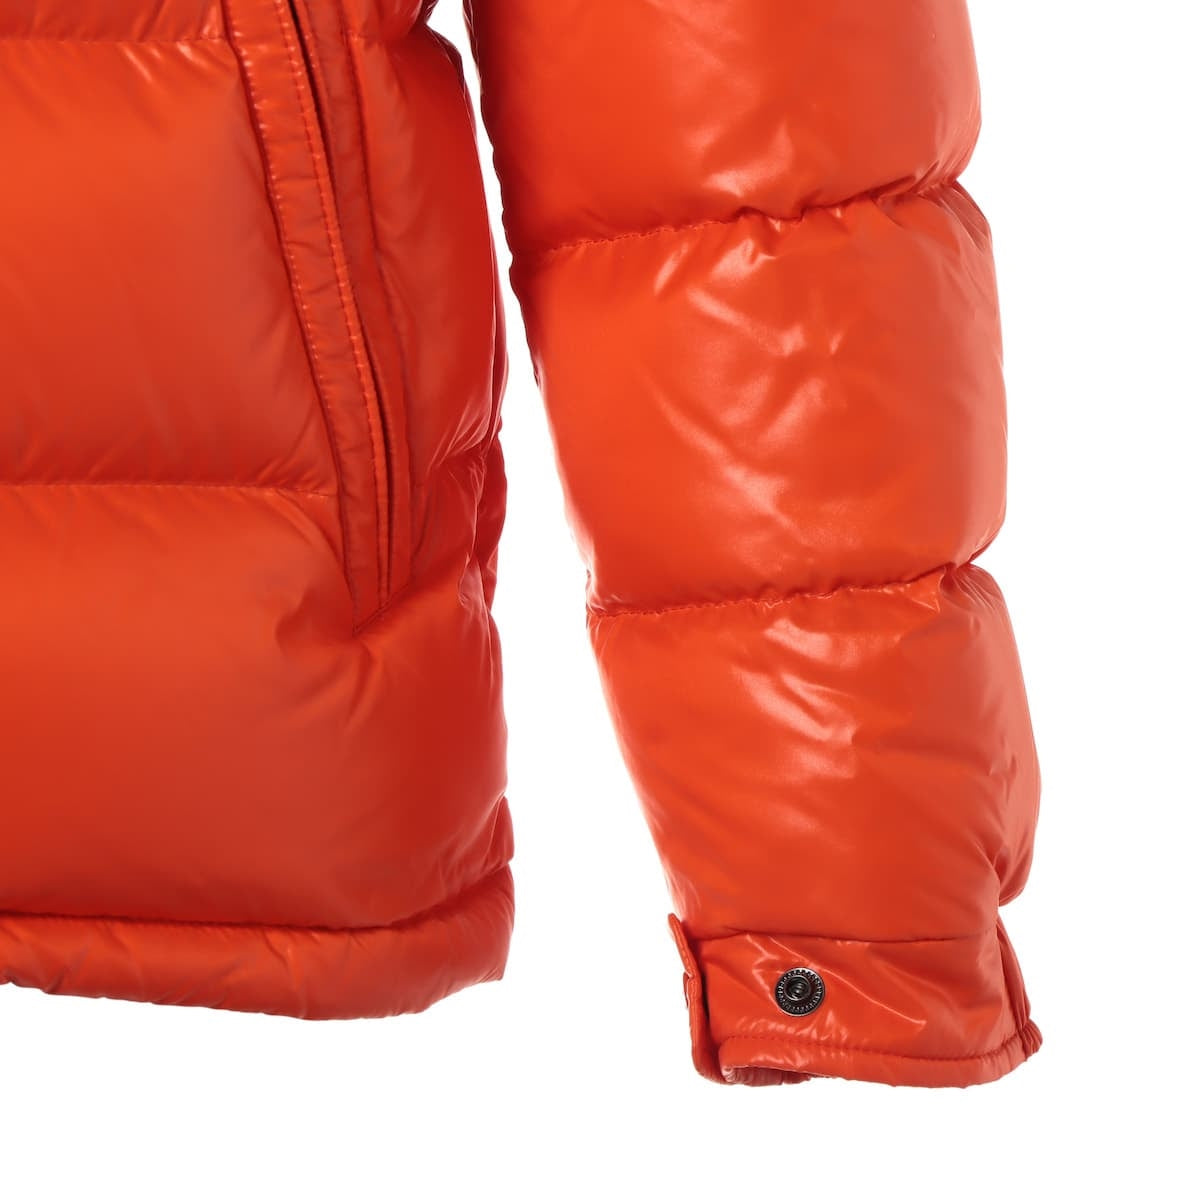 Moncler MAYA 20 years Nylon Down jacket 1 Men's Orange  There is dirt on the collar